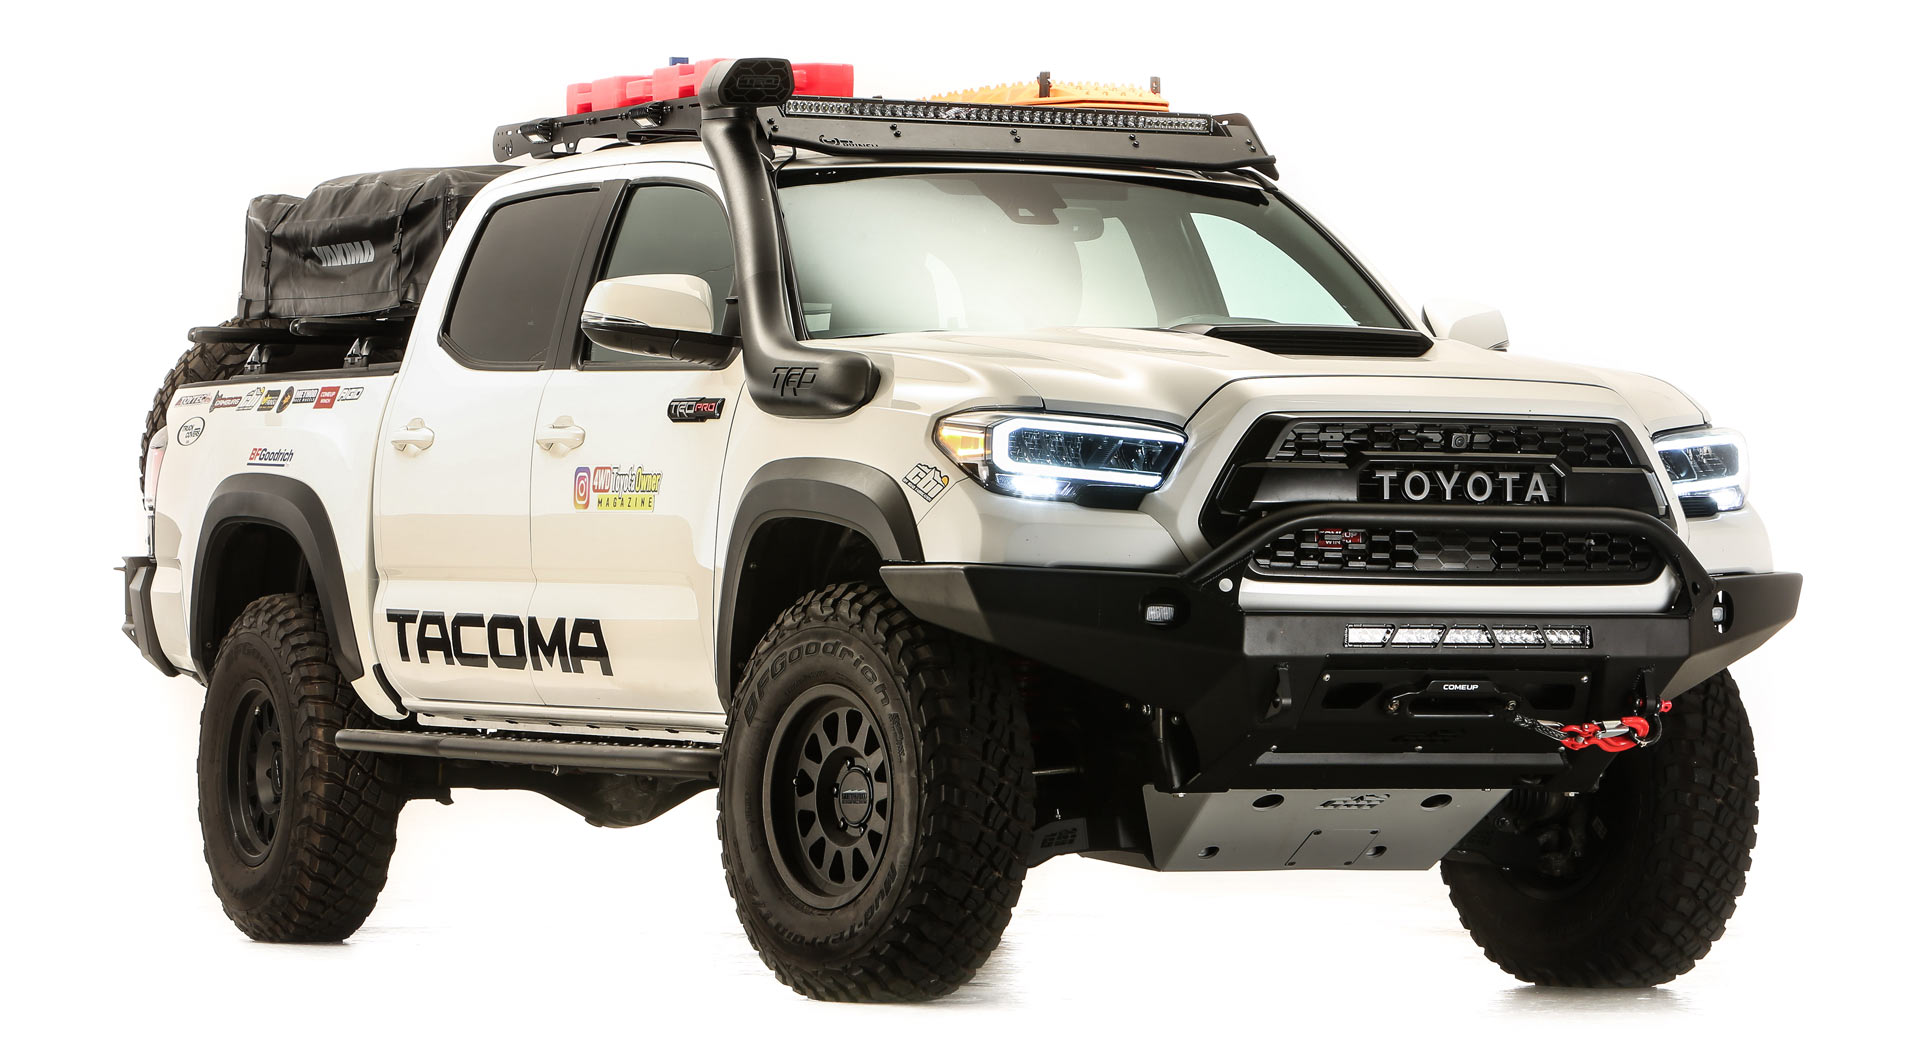 Toyota Overland Ready Tacoma Combines Rugged Looks With A Supercharged